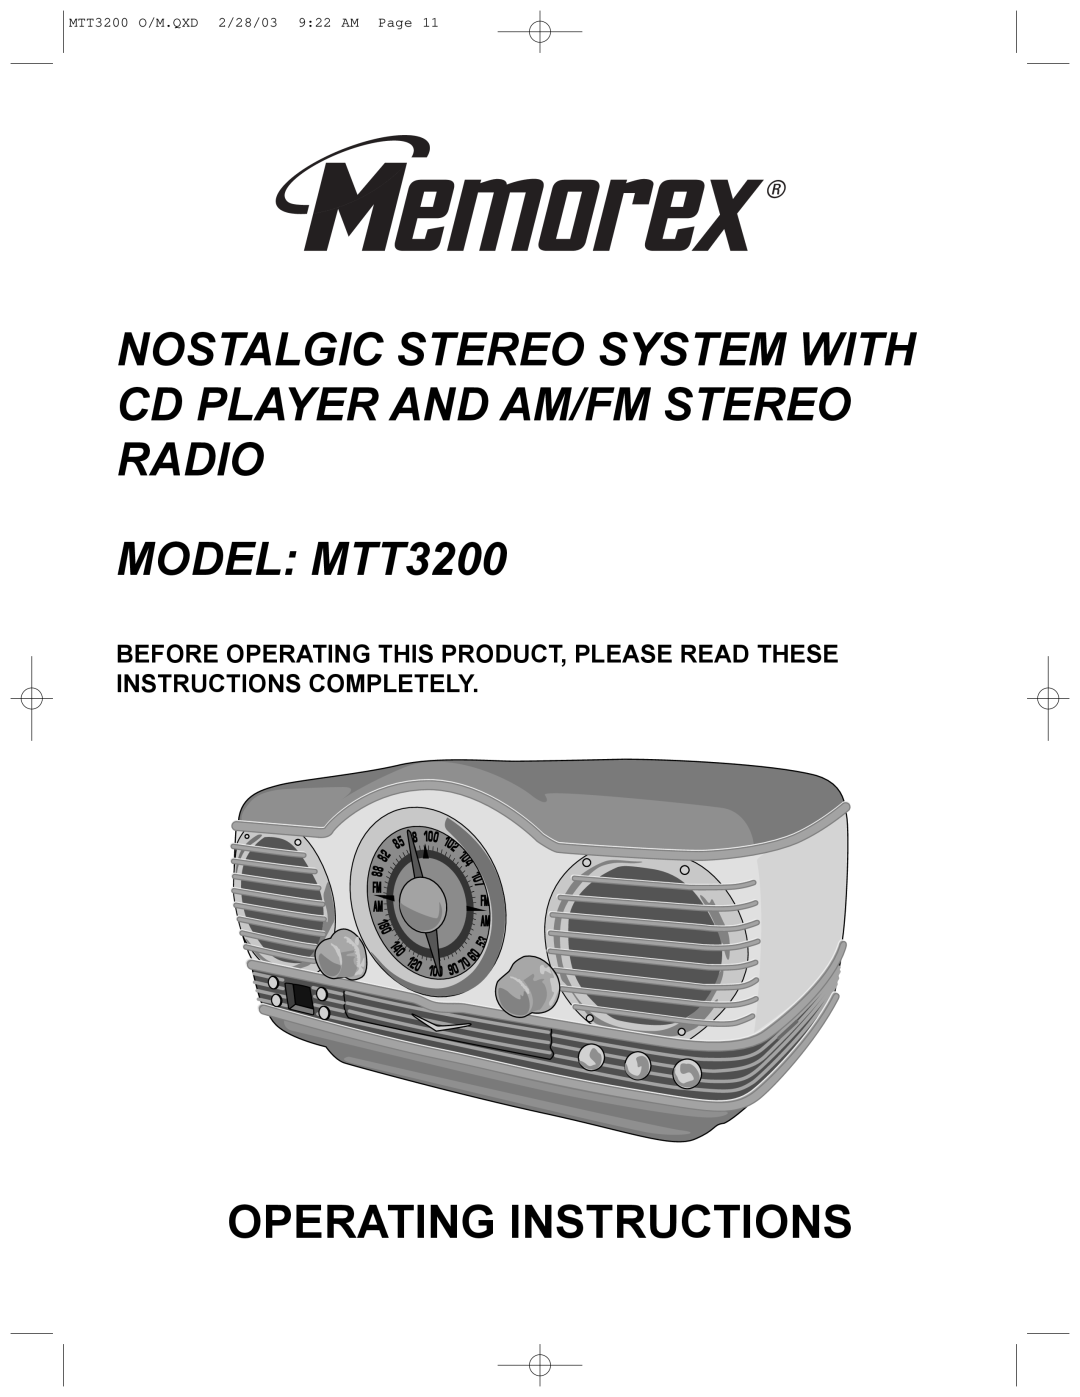 Memorex manual Nostalgic Stereo System With Cd Player And Am/Fm Stereo Radio, MODEL MTT3200, Operating Instructions 